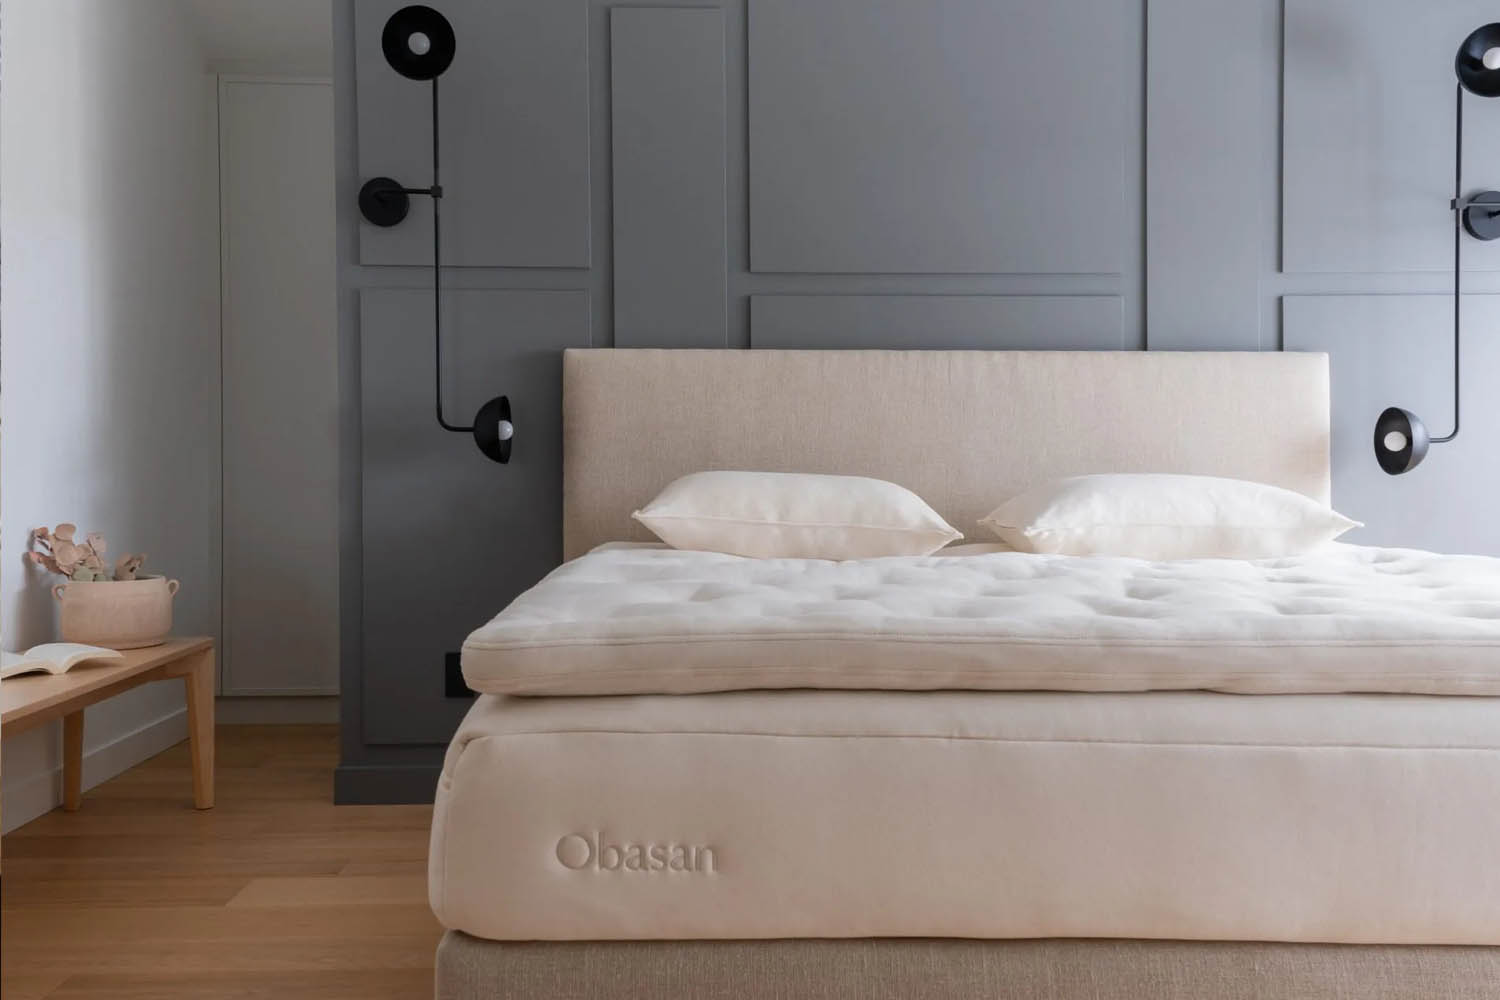 10 Best Natural, Non-Toxic Organic Mattresses: 10 Easy Pieces